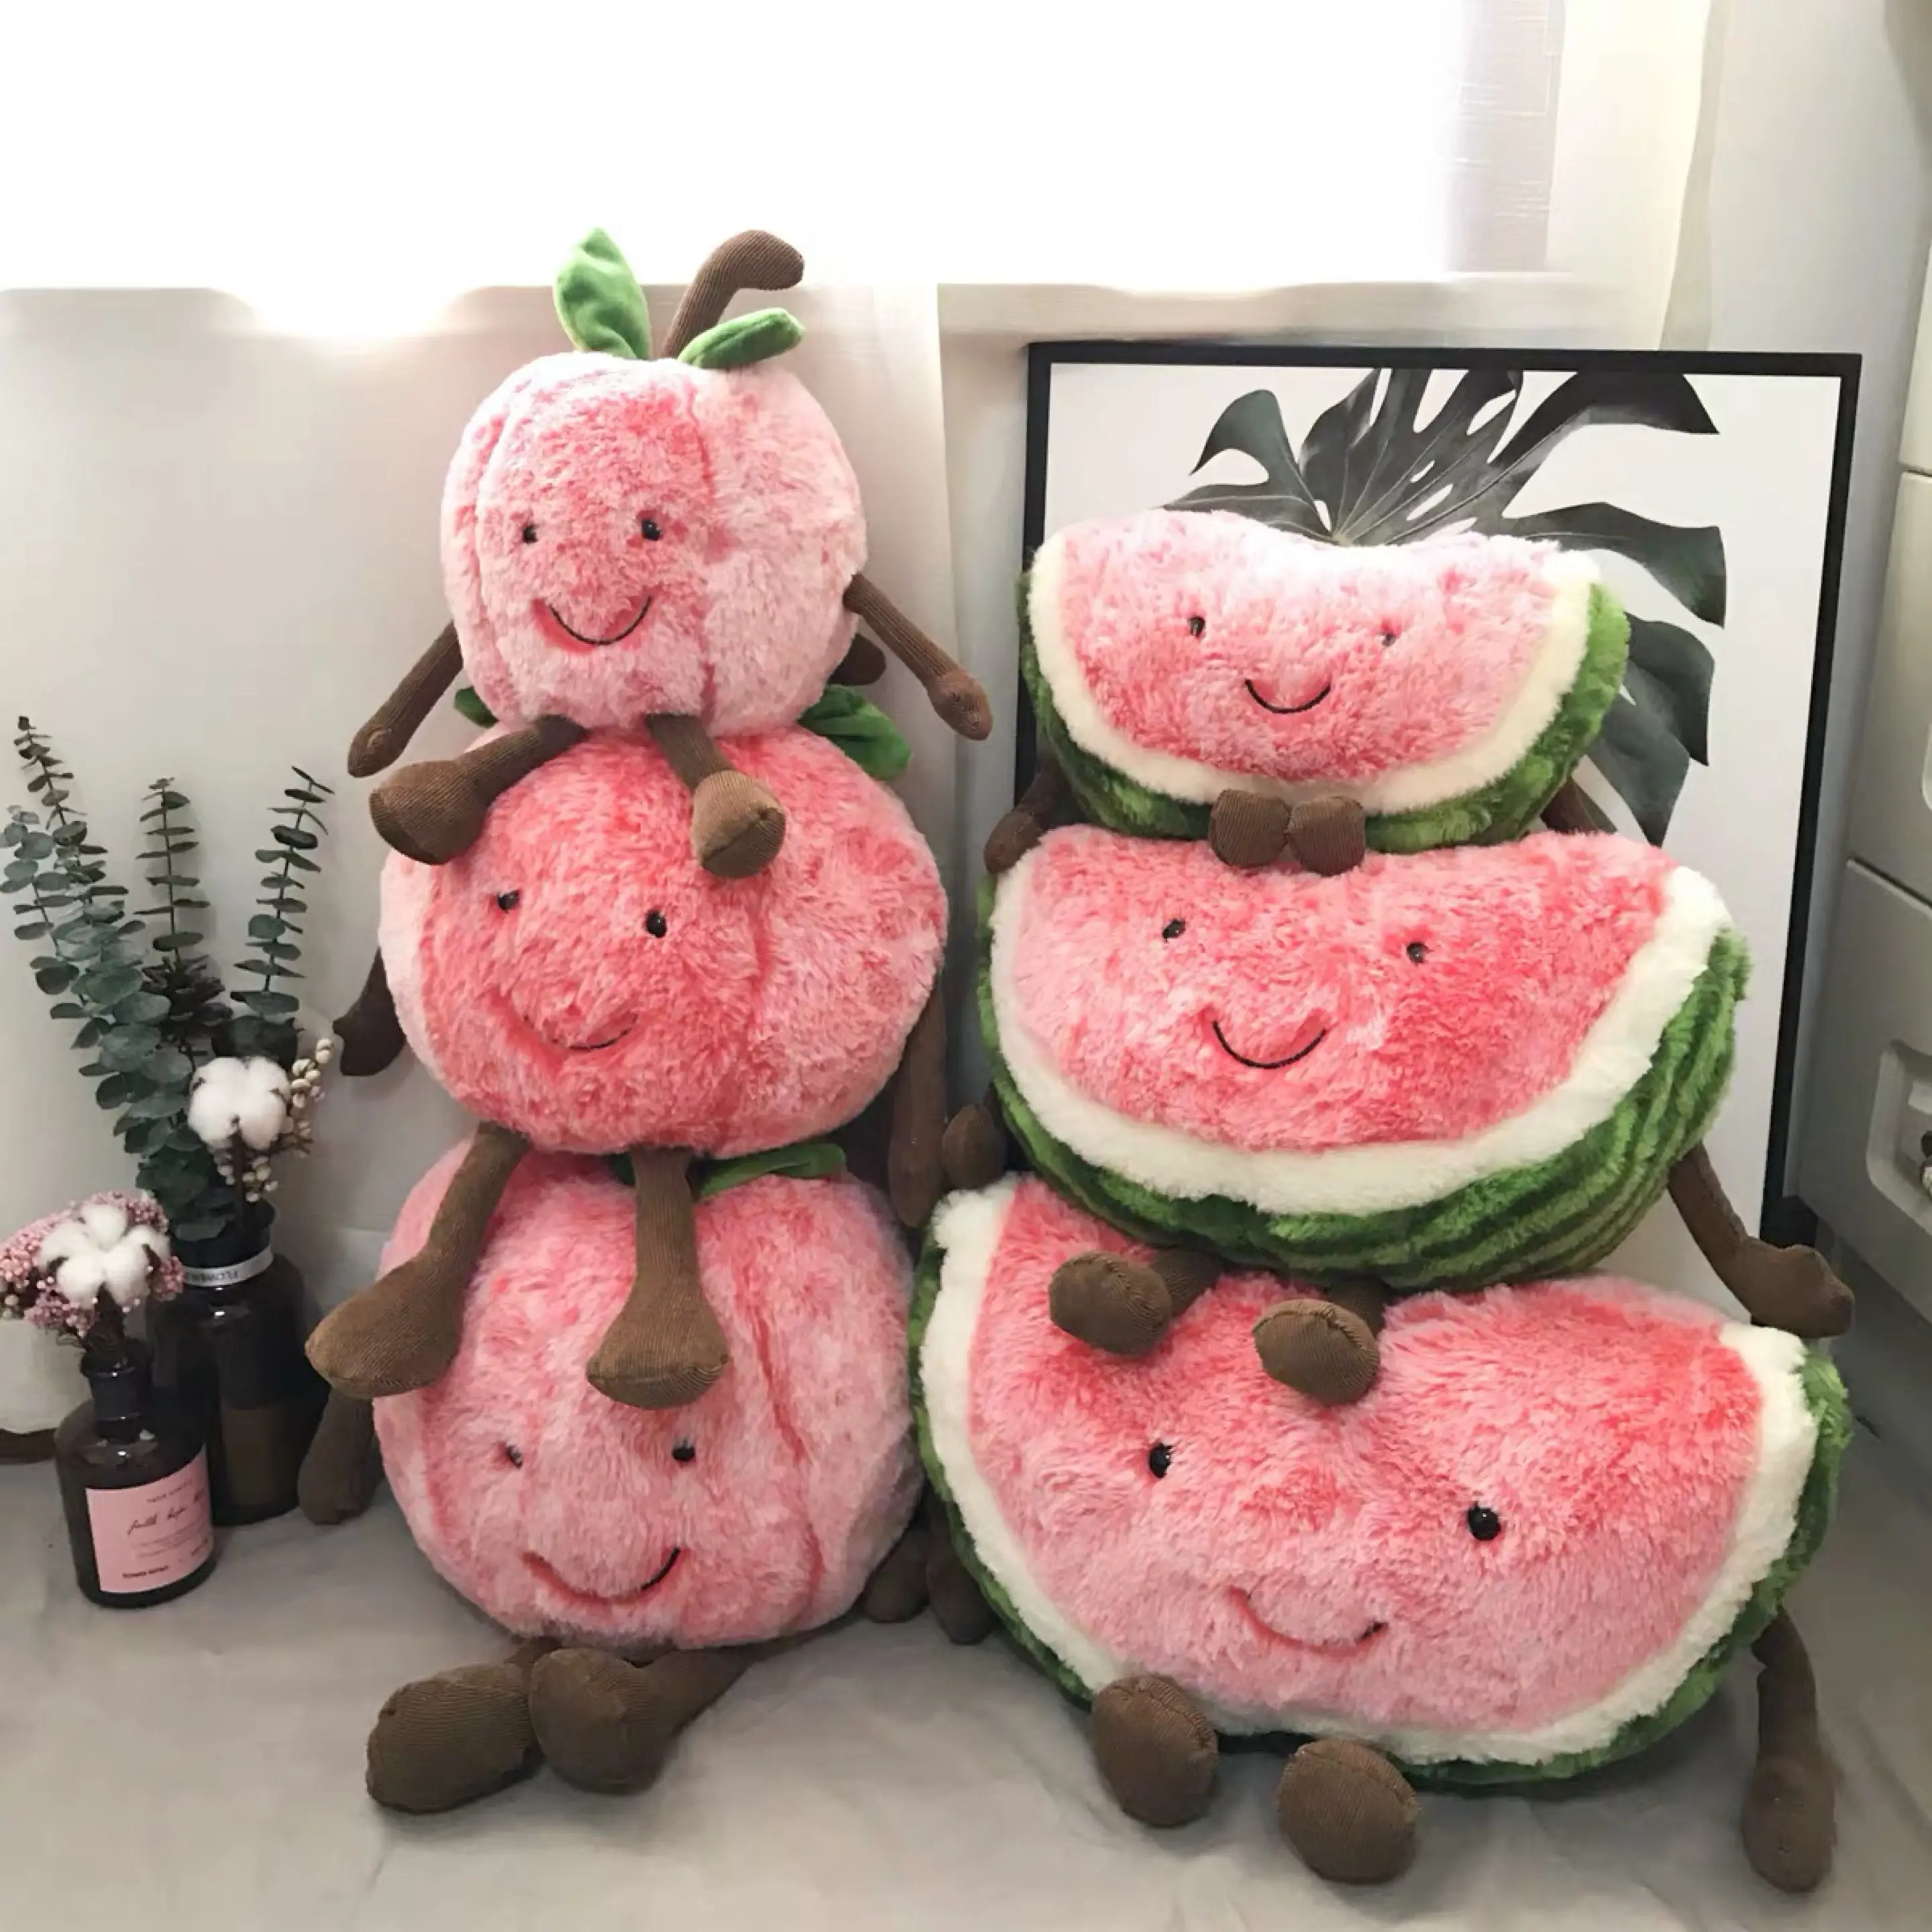 

Creative Hot Cute Sales Expression Watermelon Cherry Plush Toy Doll Home Decoration Fruit Pillow Doll A Gift for A Friend